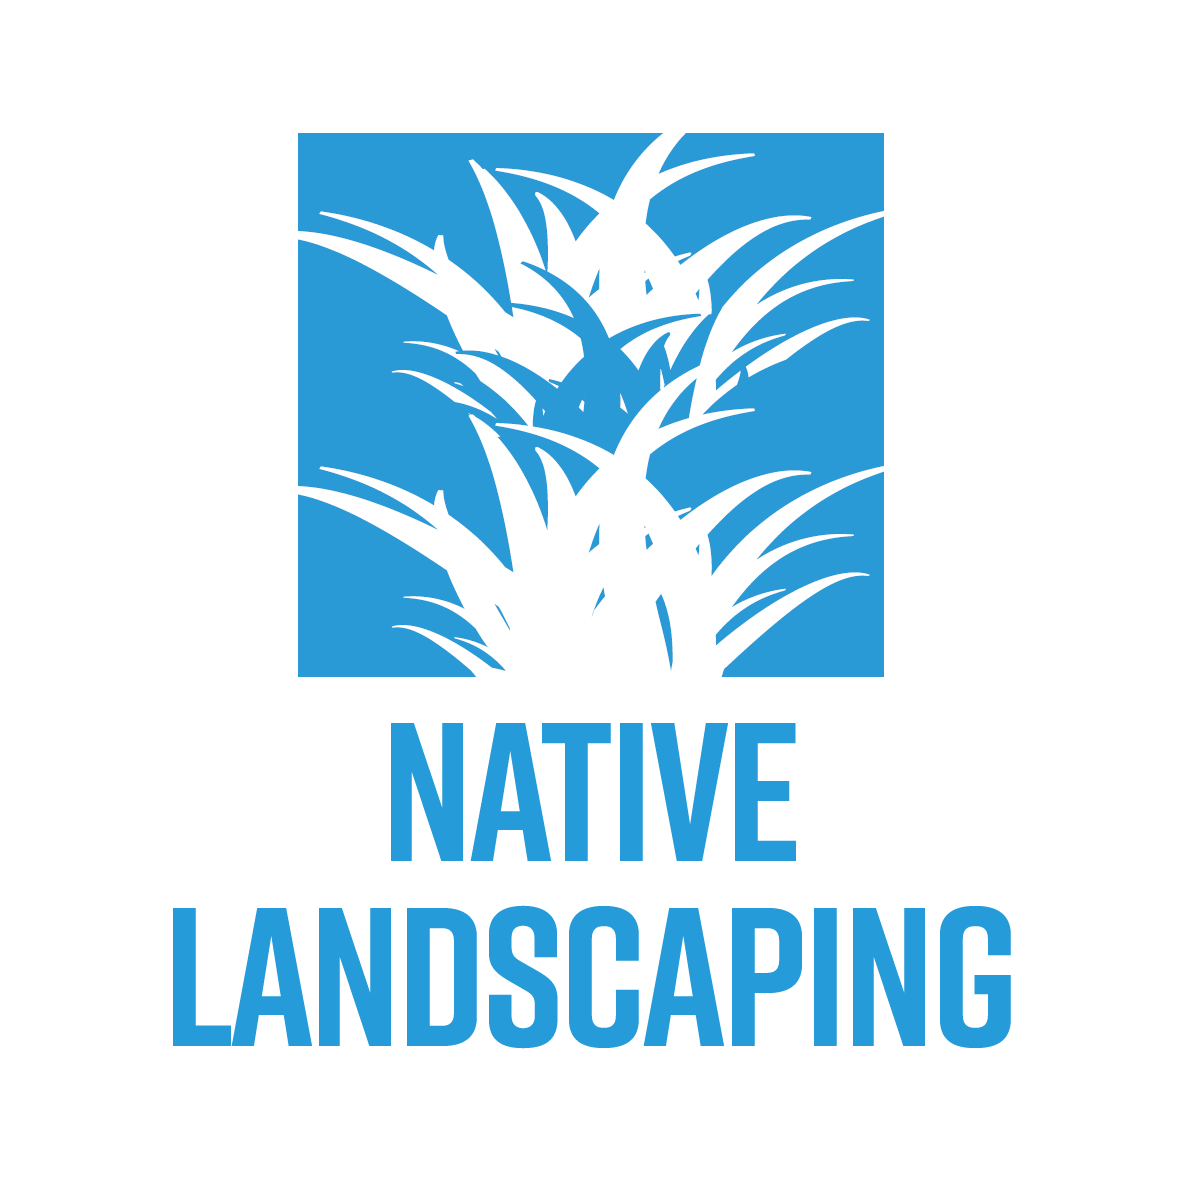 NATIVE LANDSCAPING